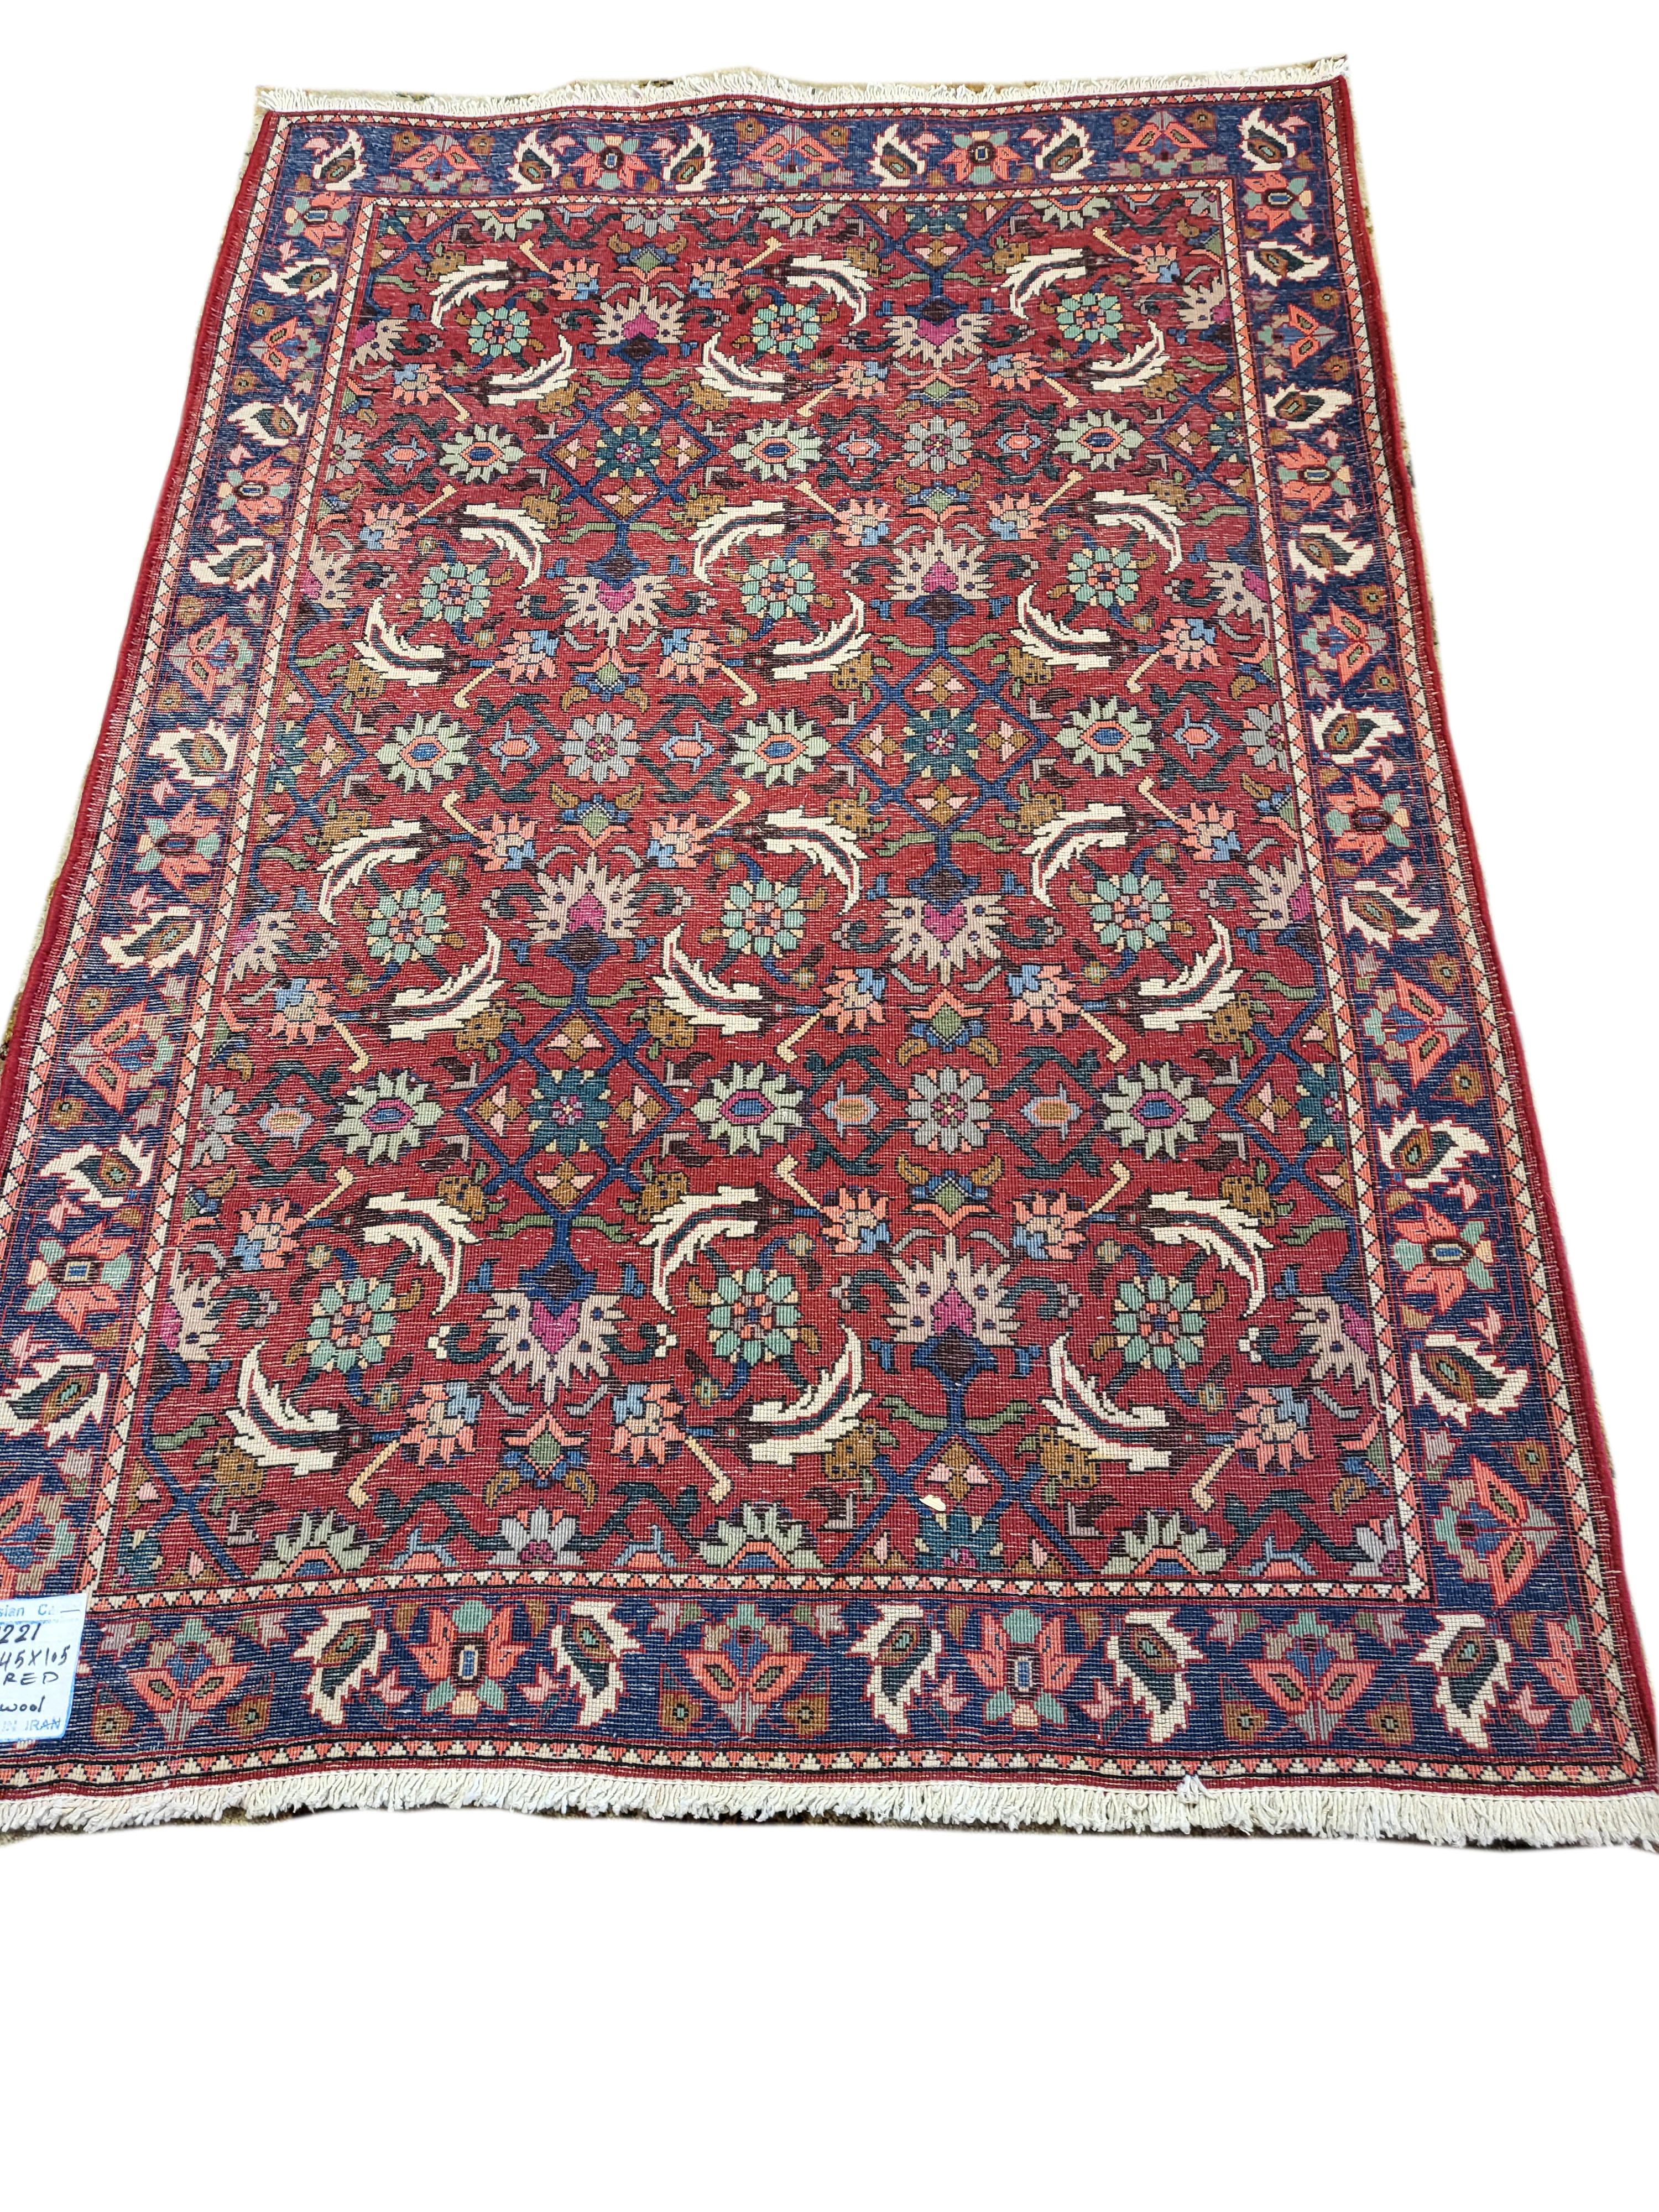 Hand-Knotted 3'x5' Antique Abadeh - Tribal Persian Rug - Red, Rare All Over Design For Sale